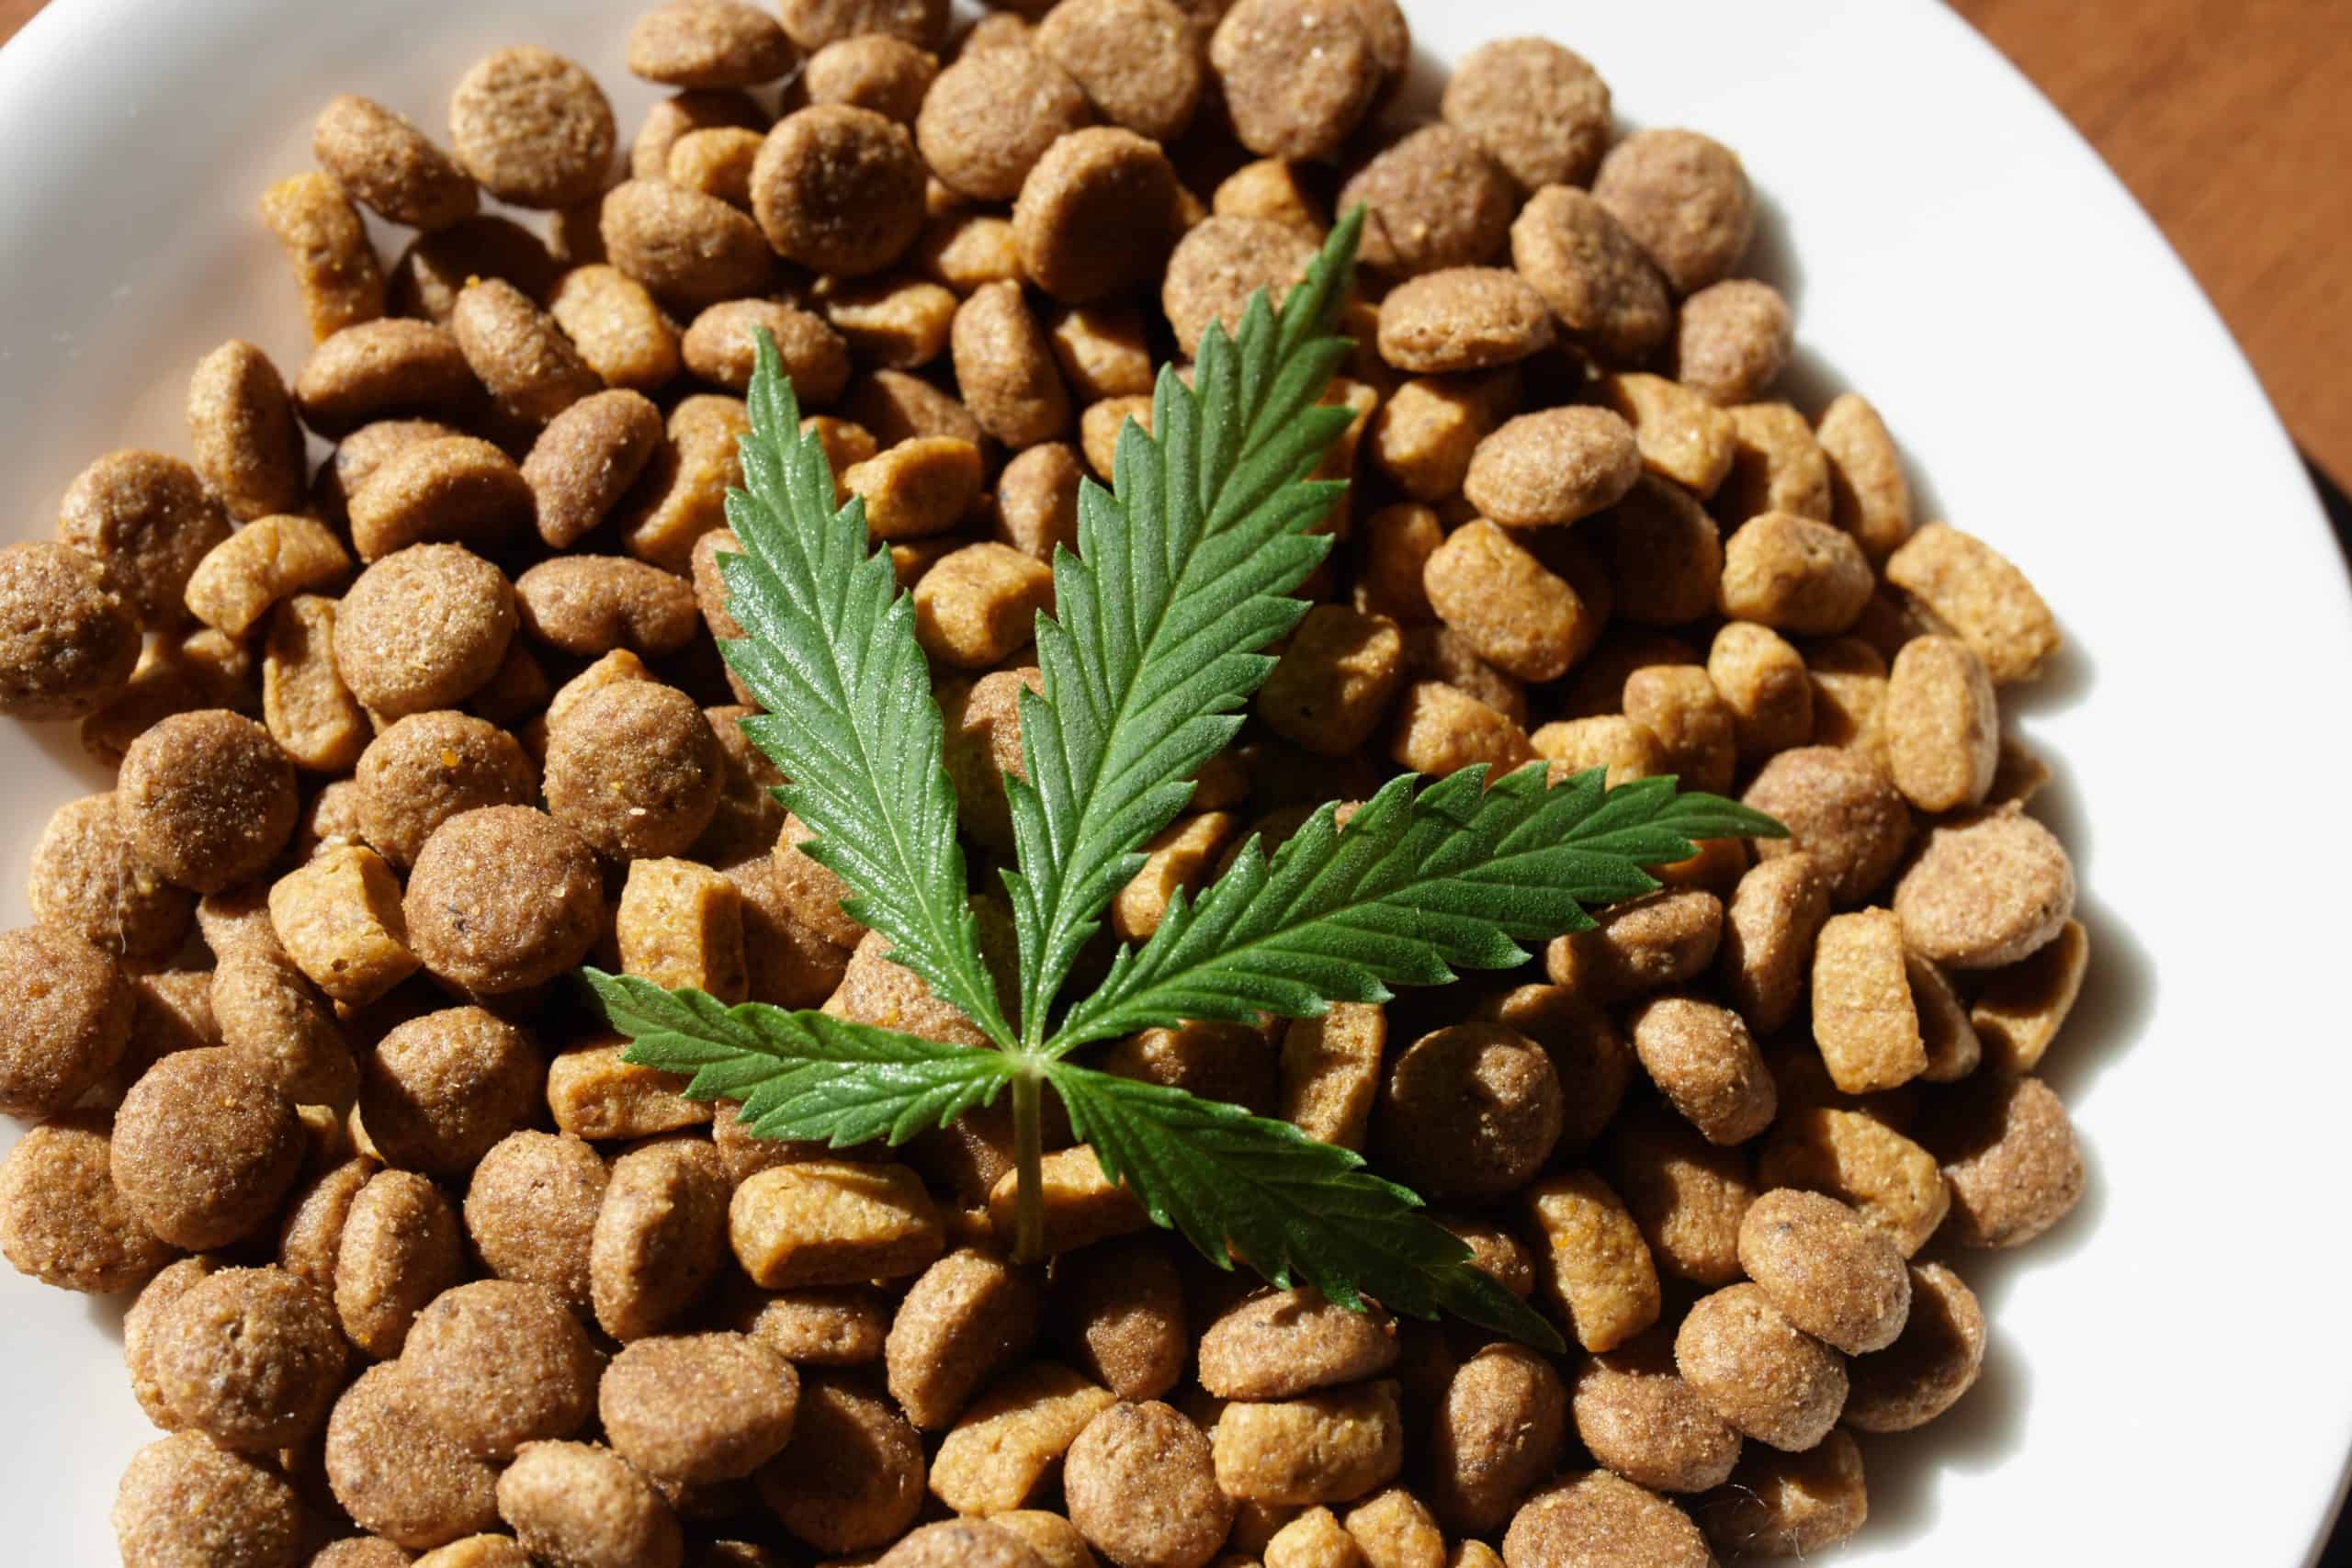 CBD dog food. CBD can help with your dog's gastrointestinal issues because it can bind itself to the receptors found in the intestines to ease any cramping and regulate bowel movements again.